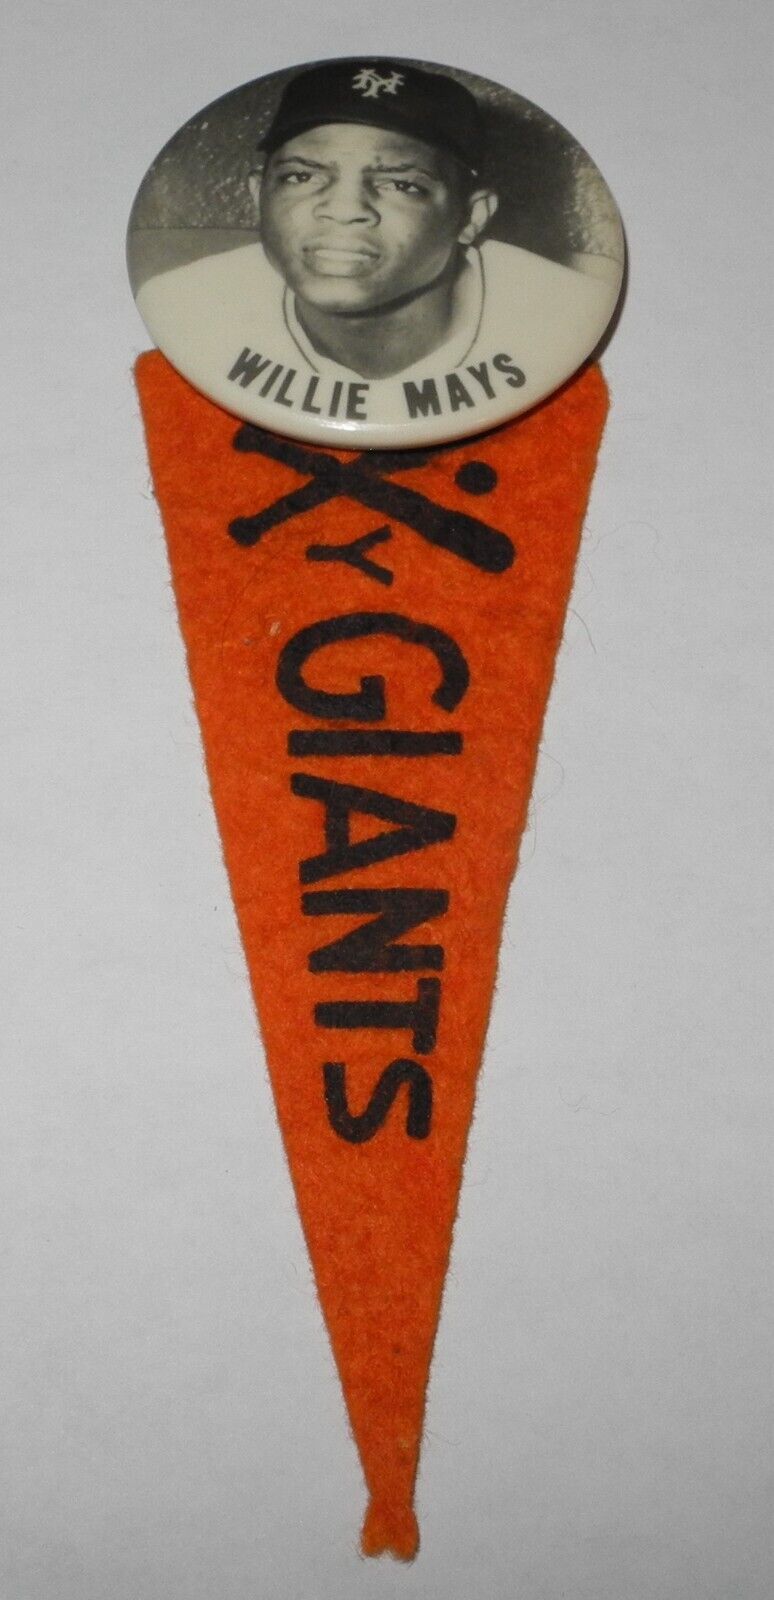 1954 Baseball Willie Mays New York Giants World Series Pin Button Coin Pennant